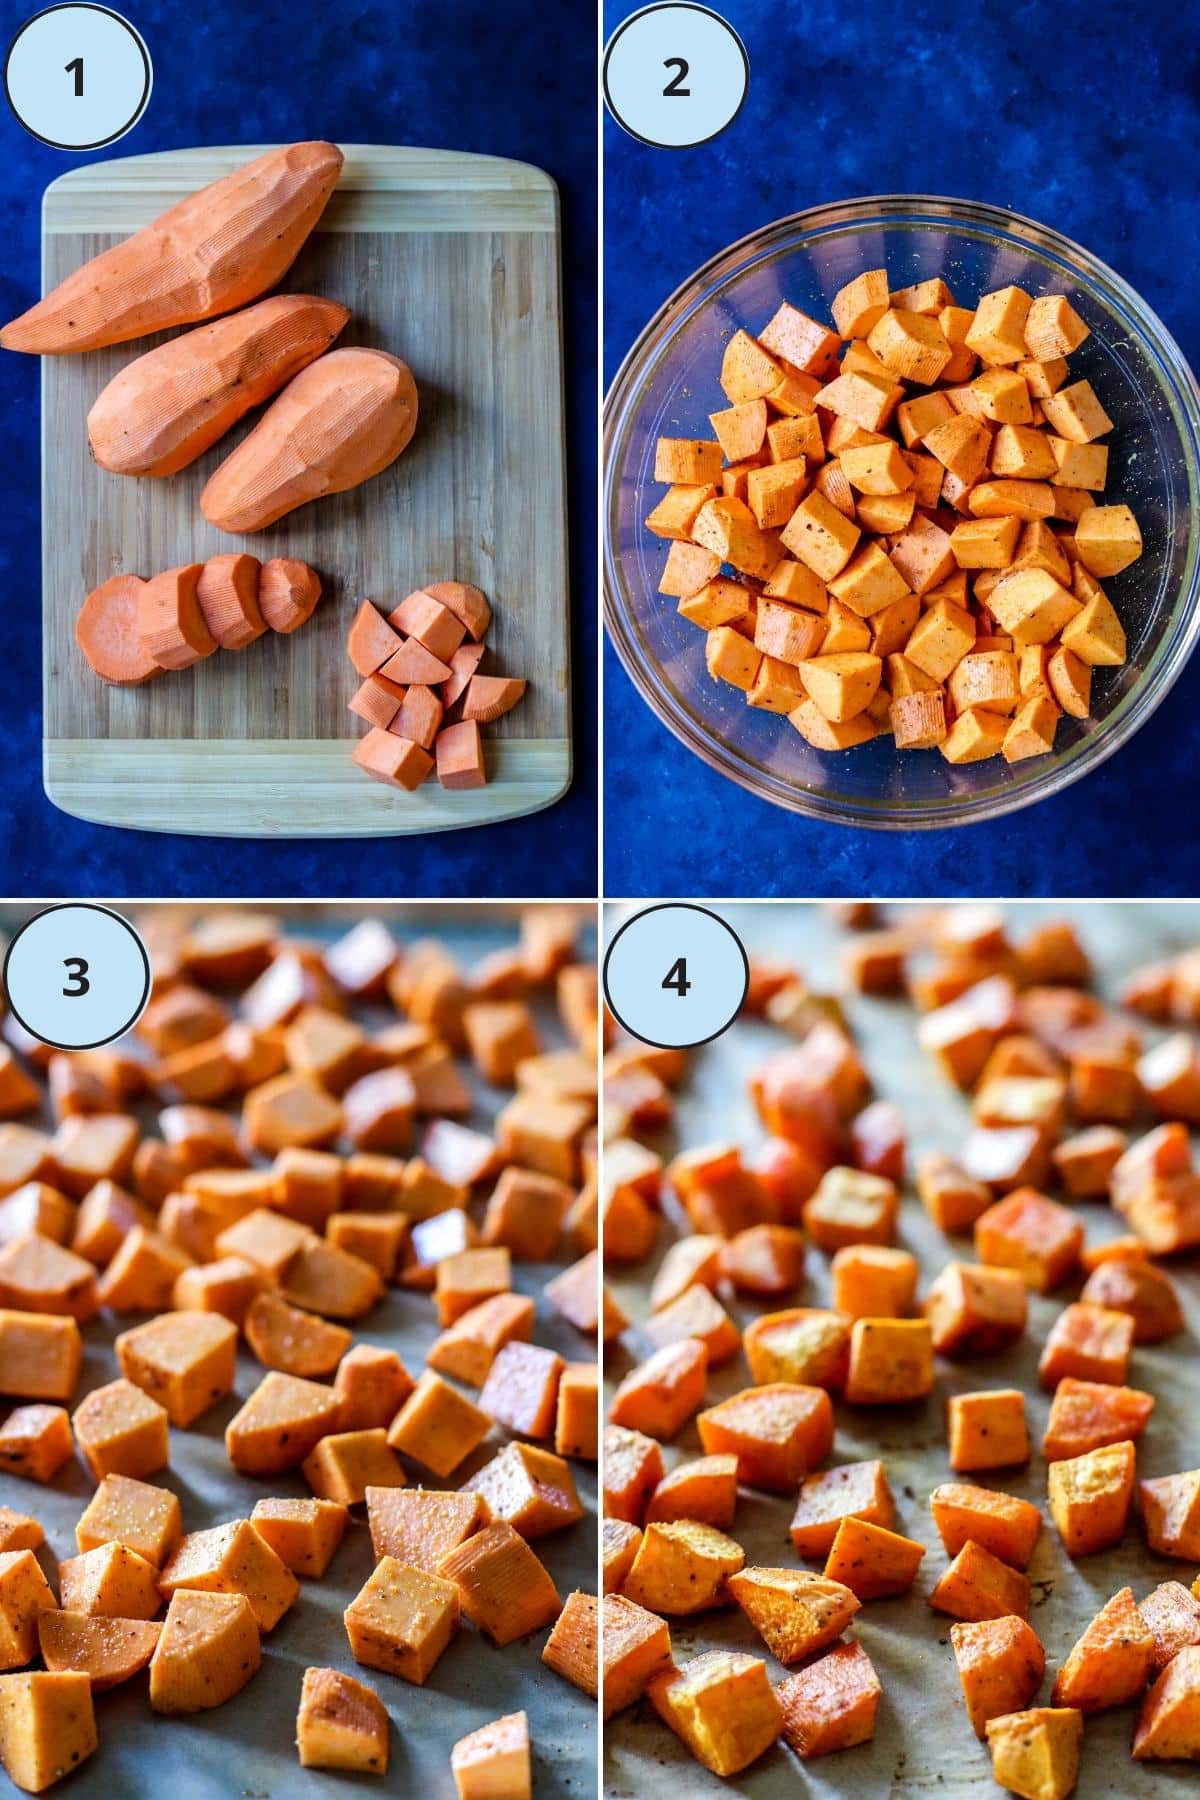 Step 1, dicing the peeled sweet potatoes, step 2, a bowl of sweet potato cubes tossed with olive oil and seasonings, step 3, the sweet potatoes spread out on a baking sheet, and step 4, the finished potatoes.